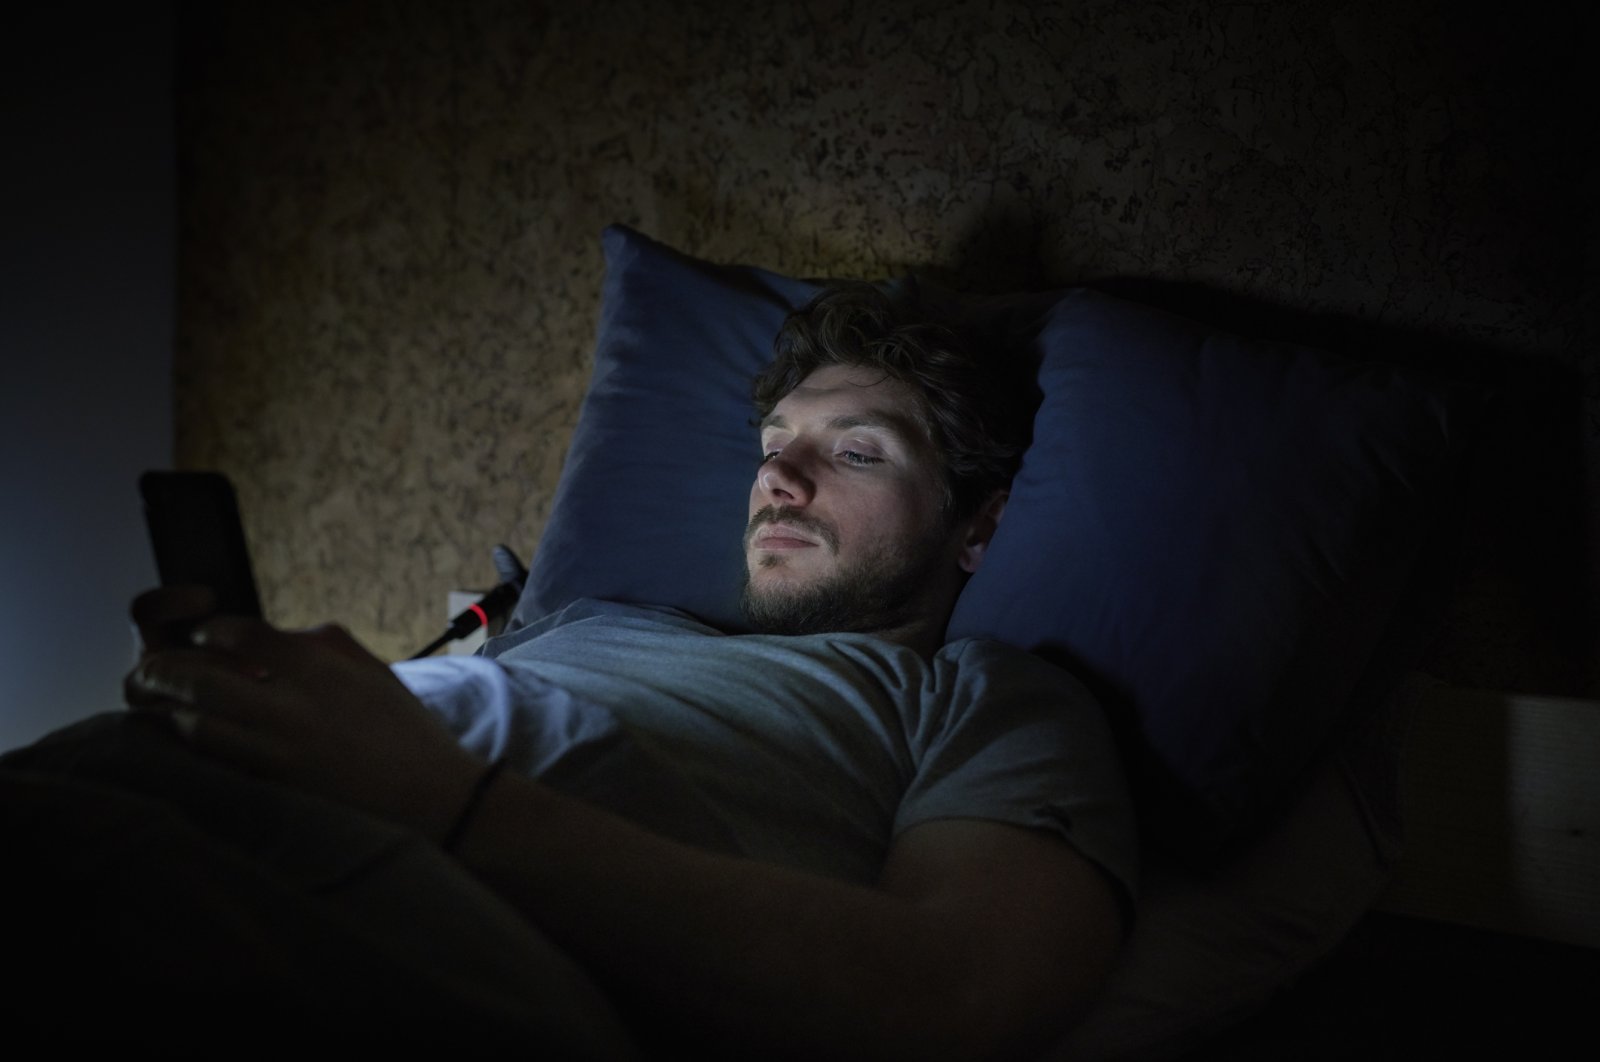 A man is using a phone late at night amid lack of sleep. (Getty images)